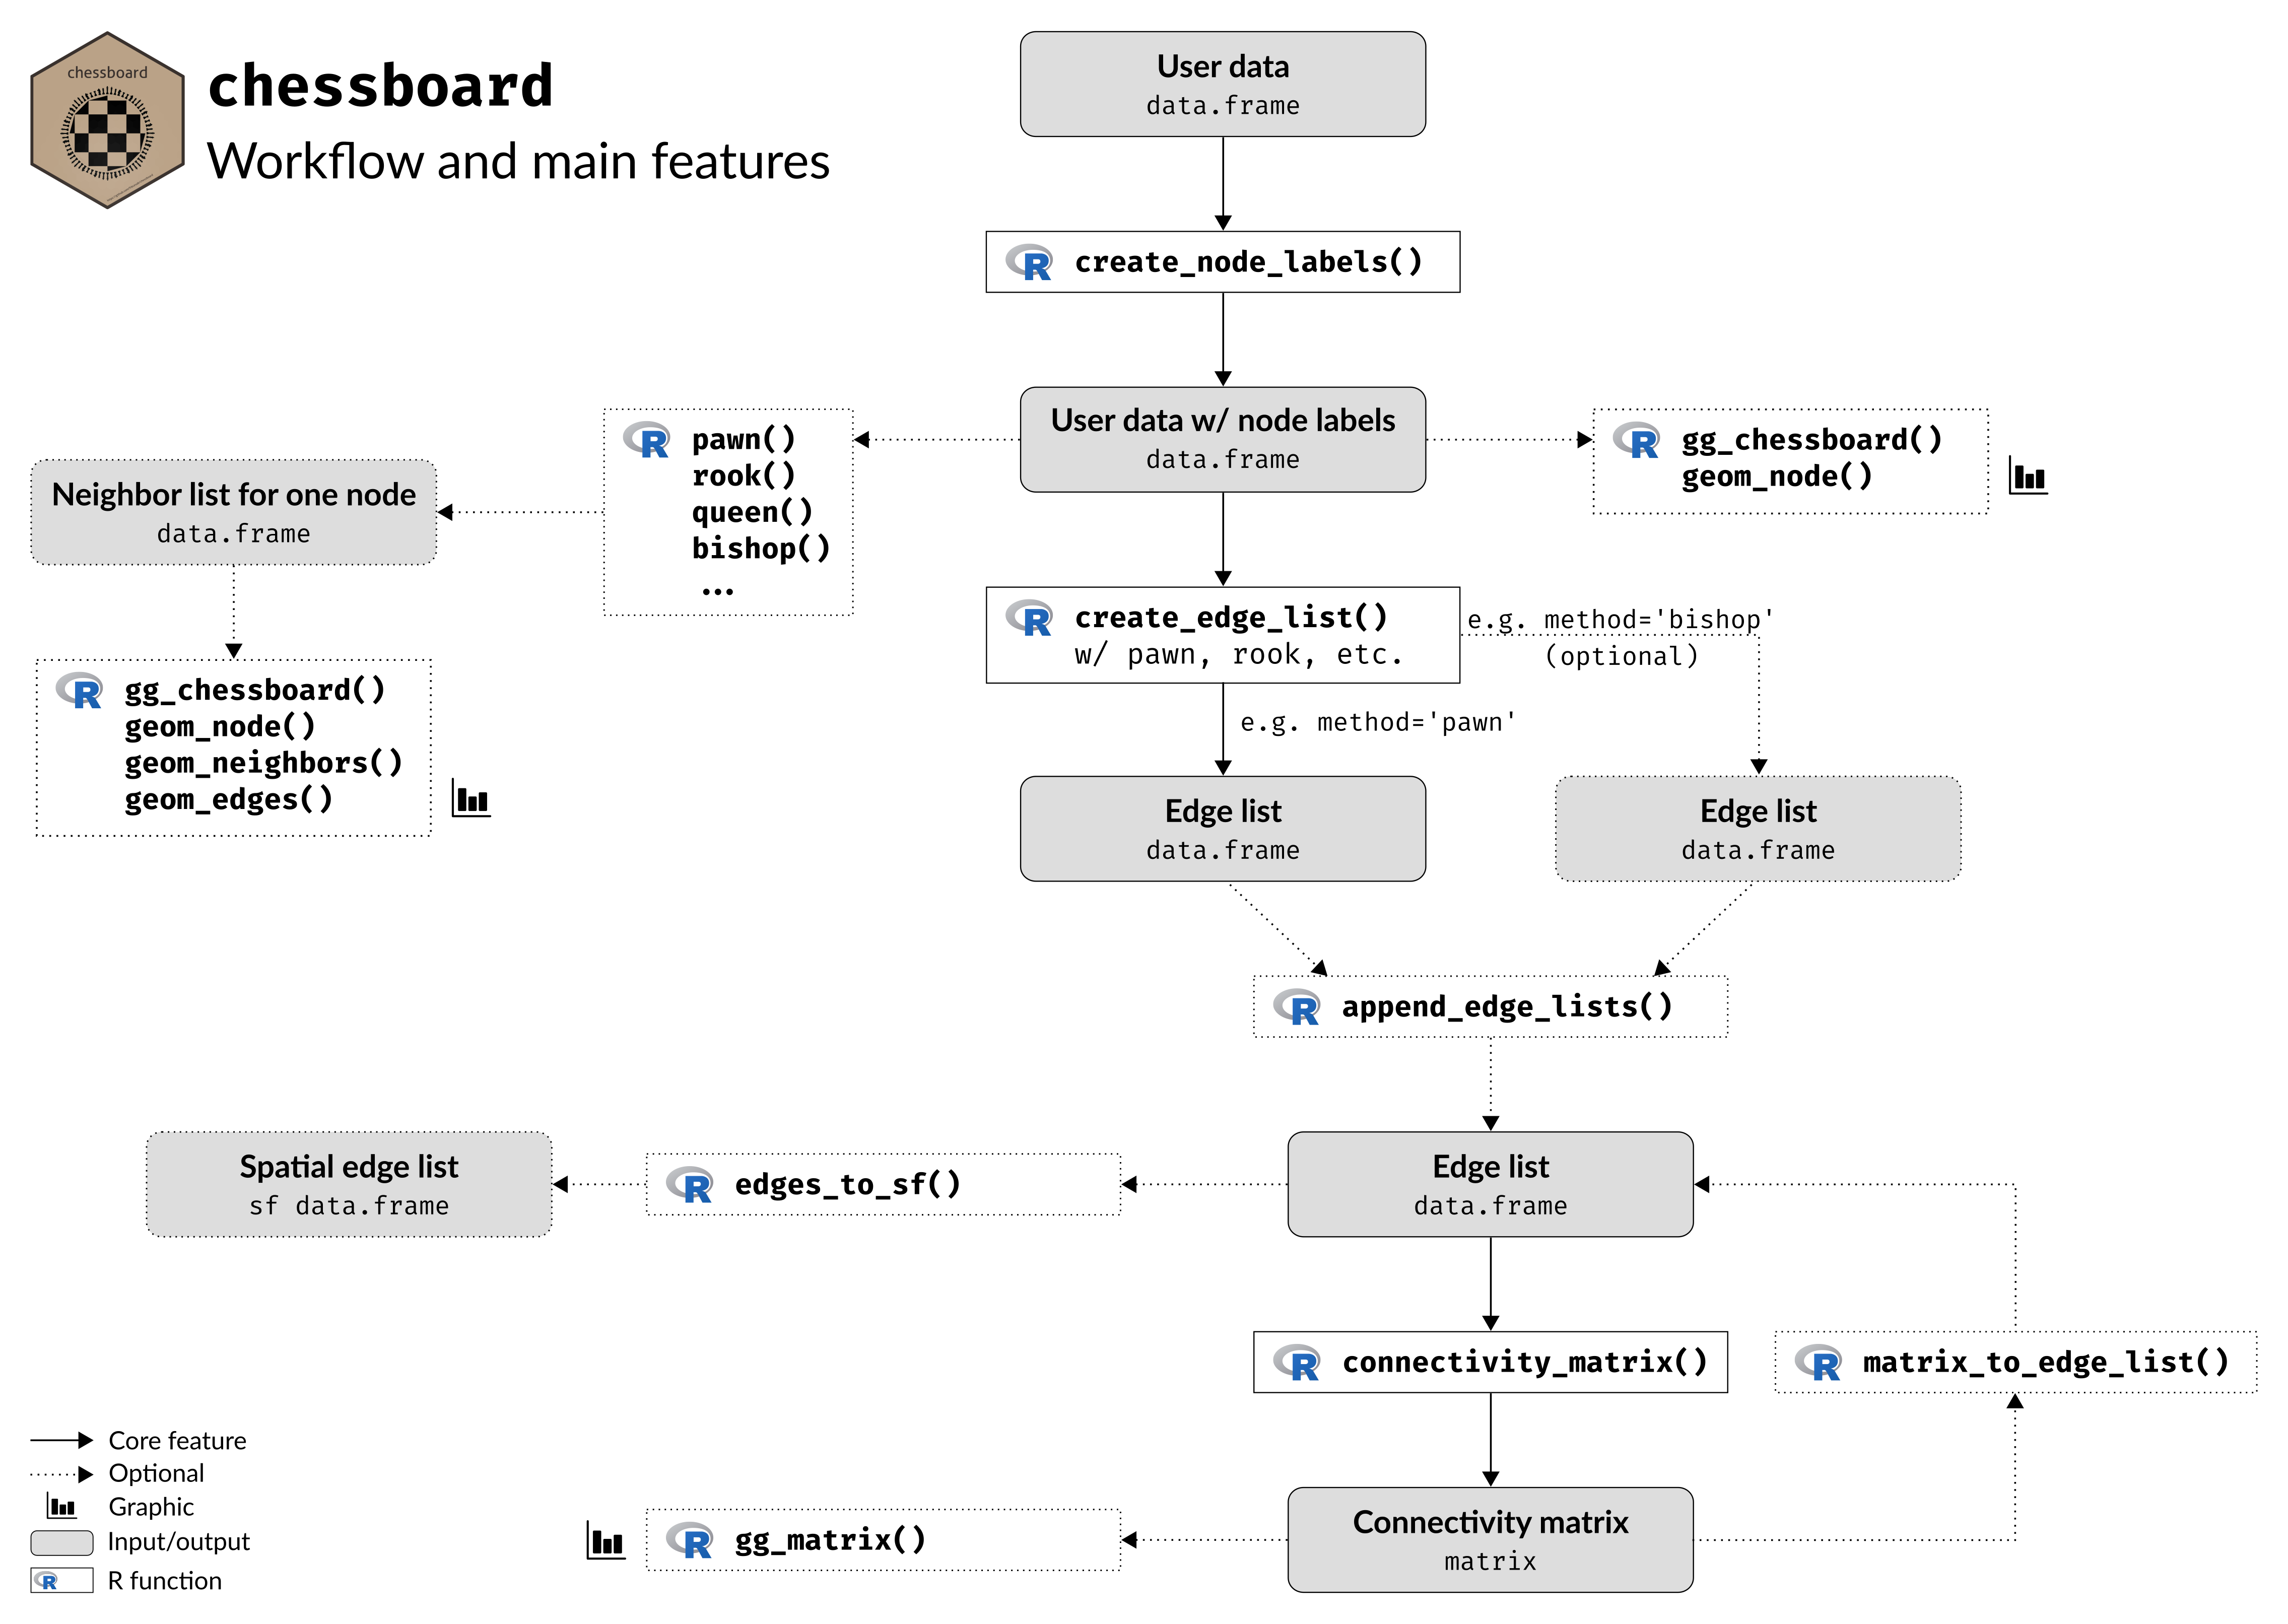 Figure 2. Workflow and main features of `chessboard`